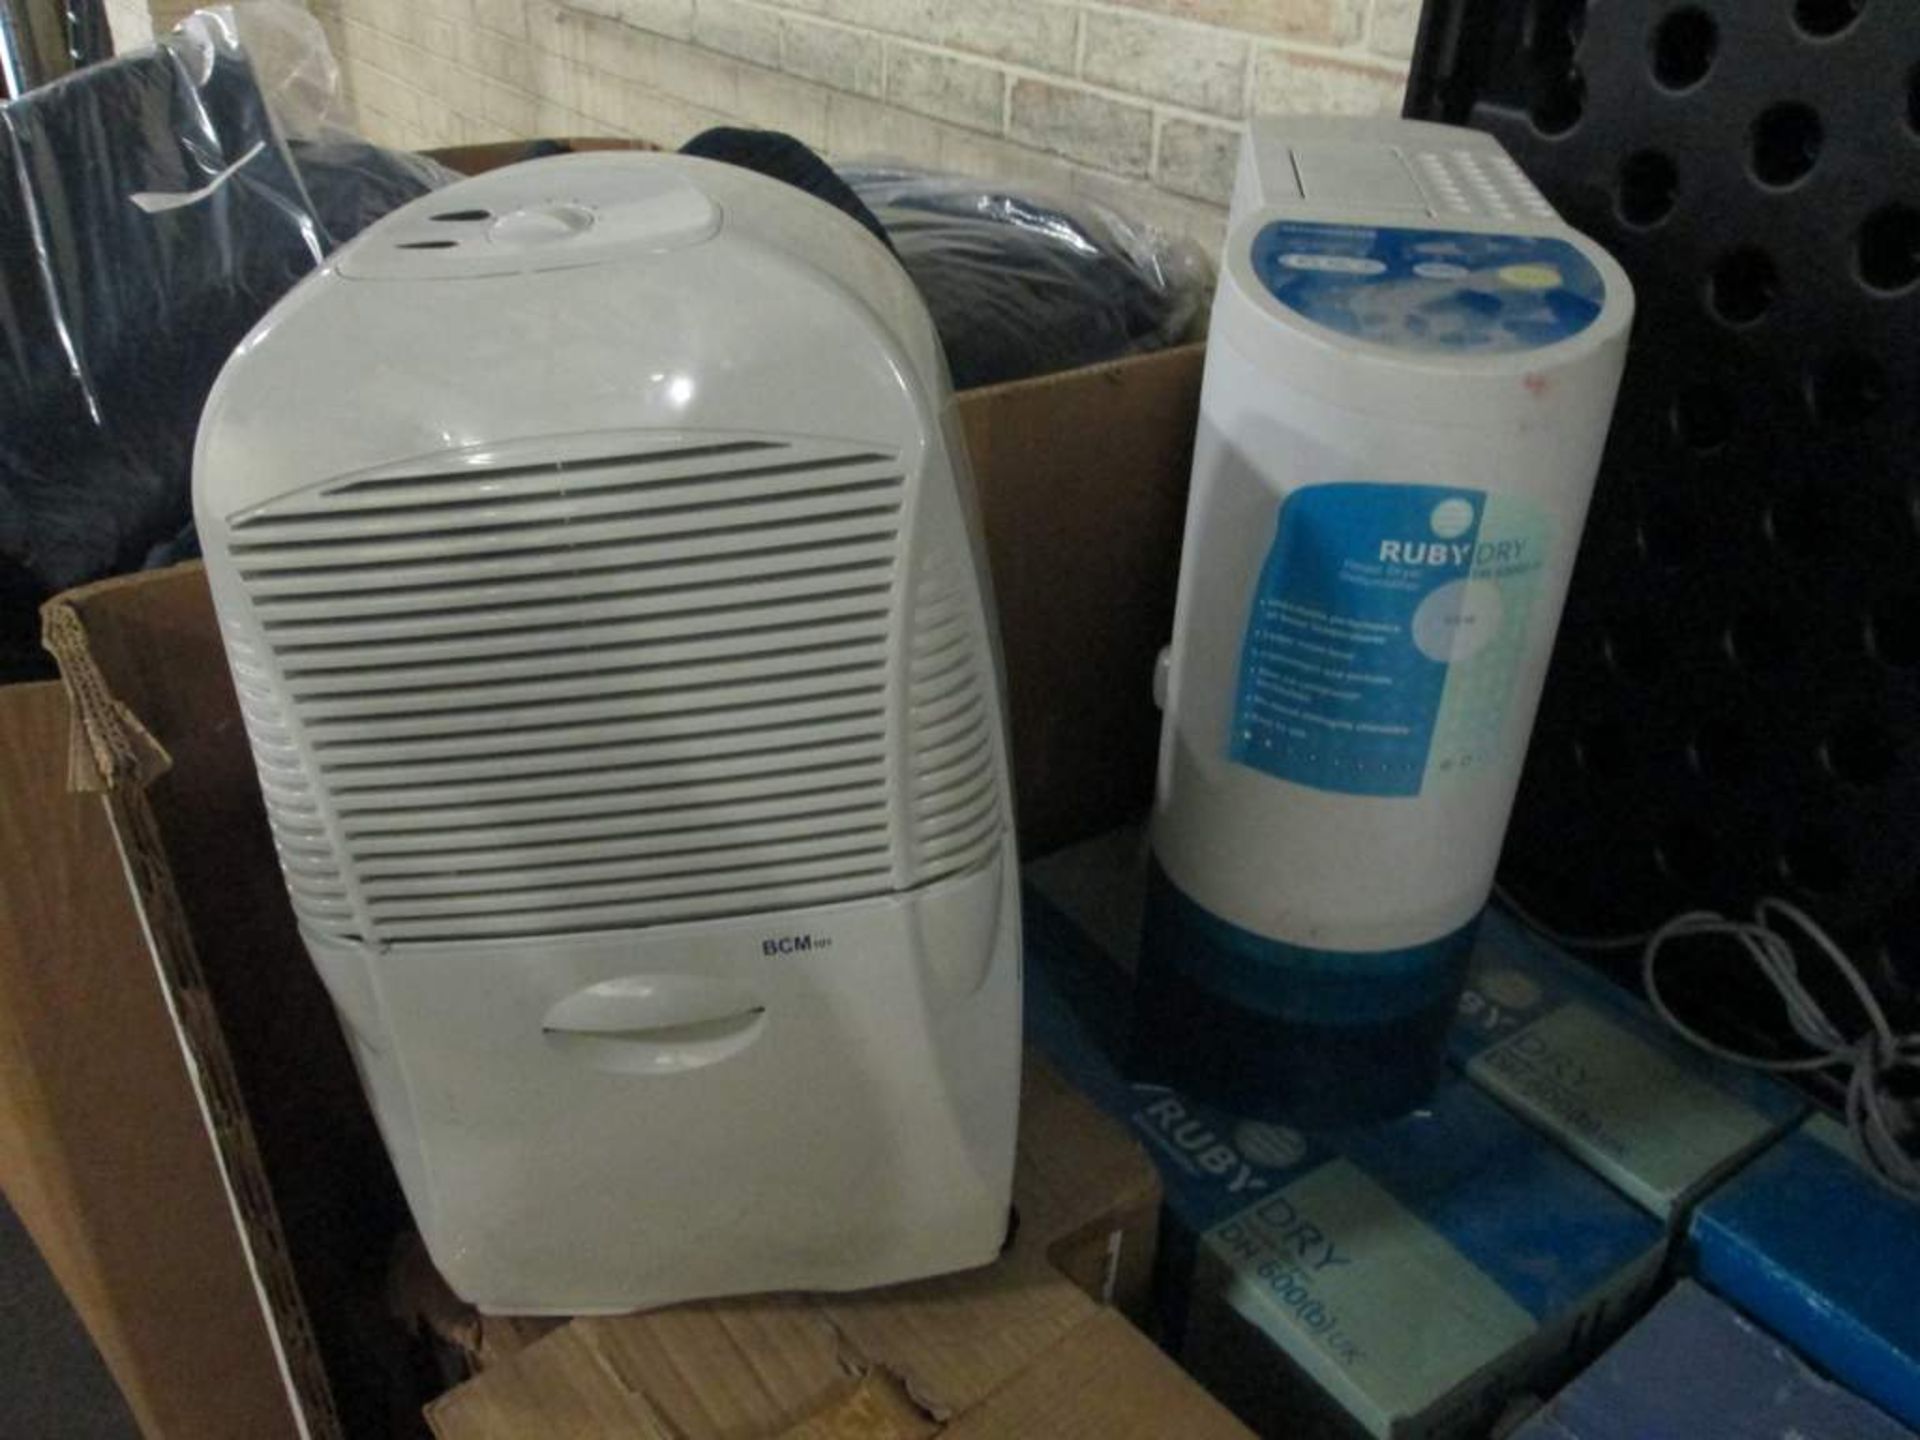 7x Various dehumidifiers - Ruby DH600, BCM101 - Image 2 of 3